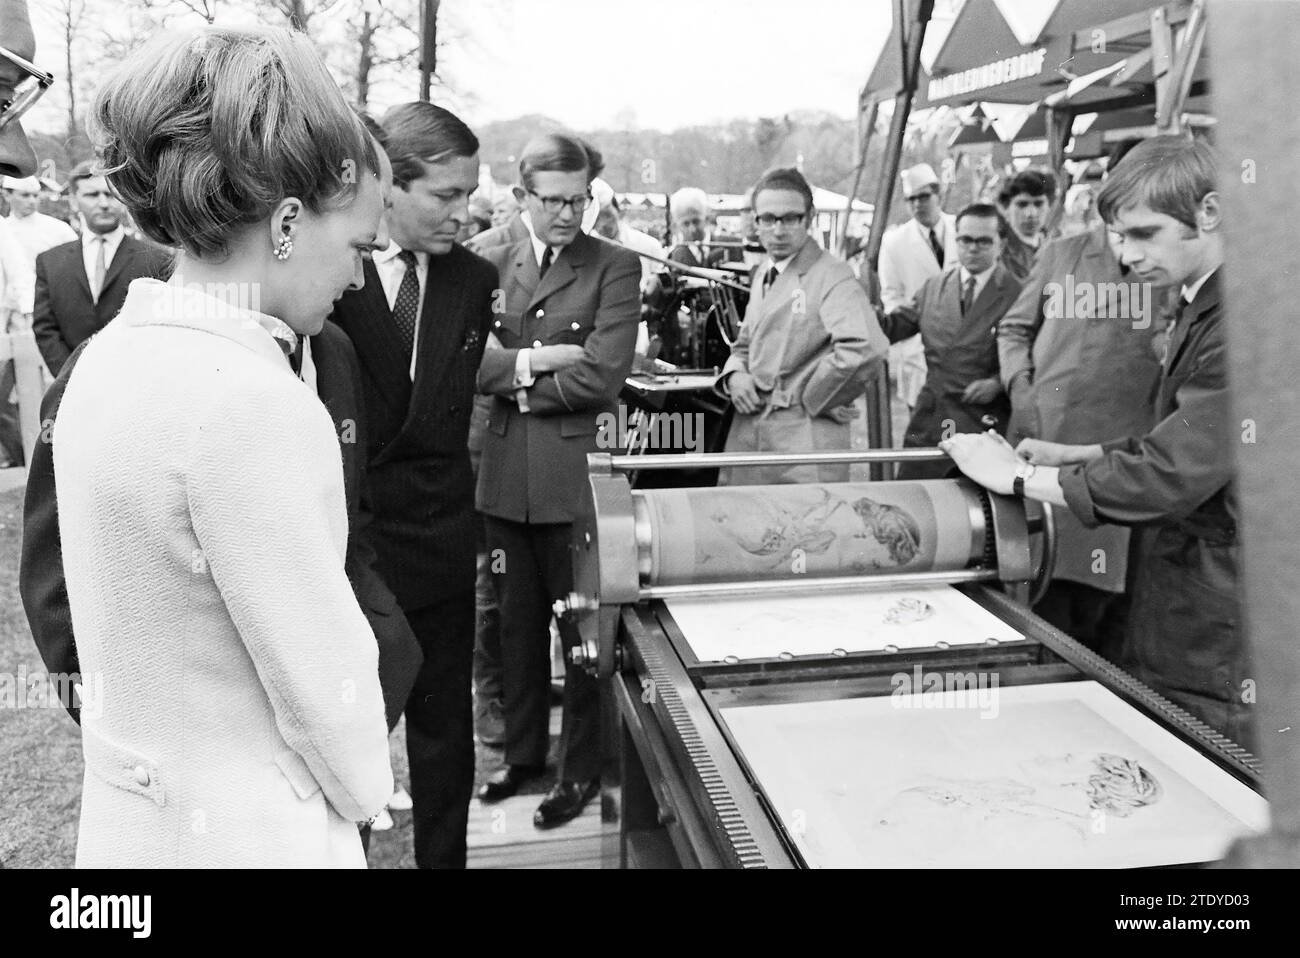 Defile Koninginnedag on Soestdijk, Queen's Day, 01-05-1967, Whizgle News from the Past, Tailored for the Future. Explore historical narratives, Dutch The Netherlands agency image with a modern perspective, bridging the gap between yesterday's events and tomorrow's insights. A timeless journey shaping the stories that shape our future. Stock Photo